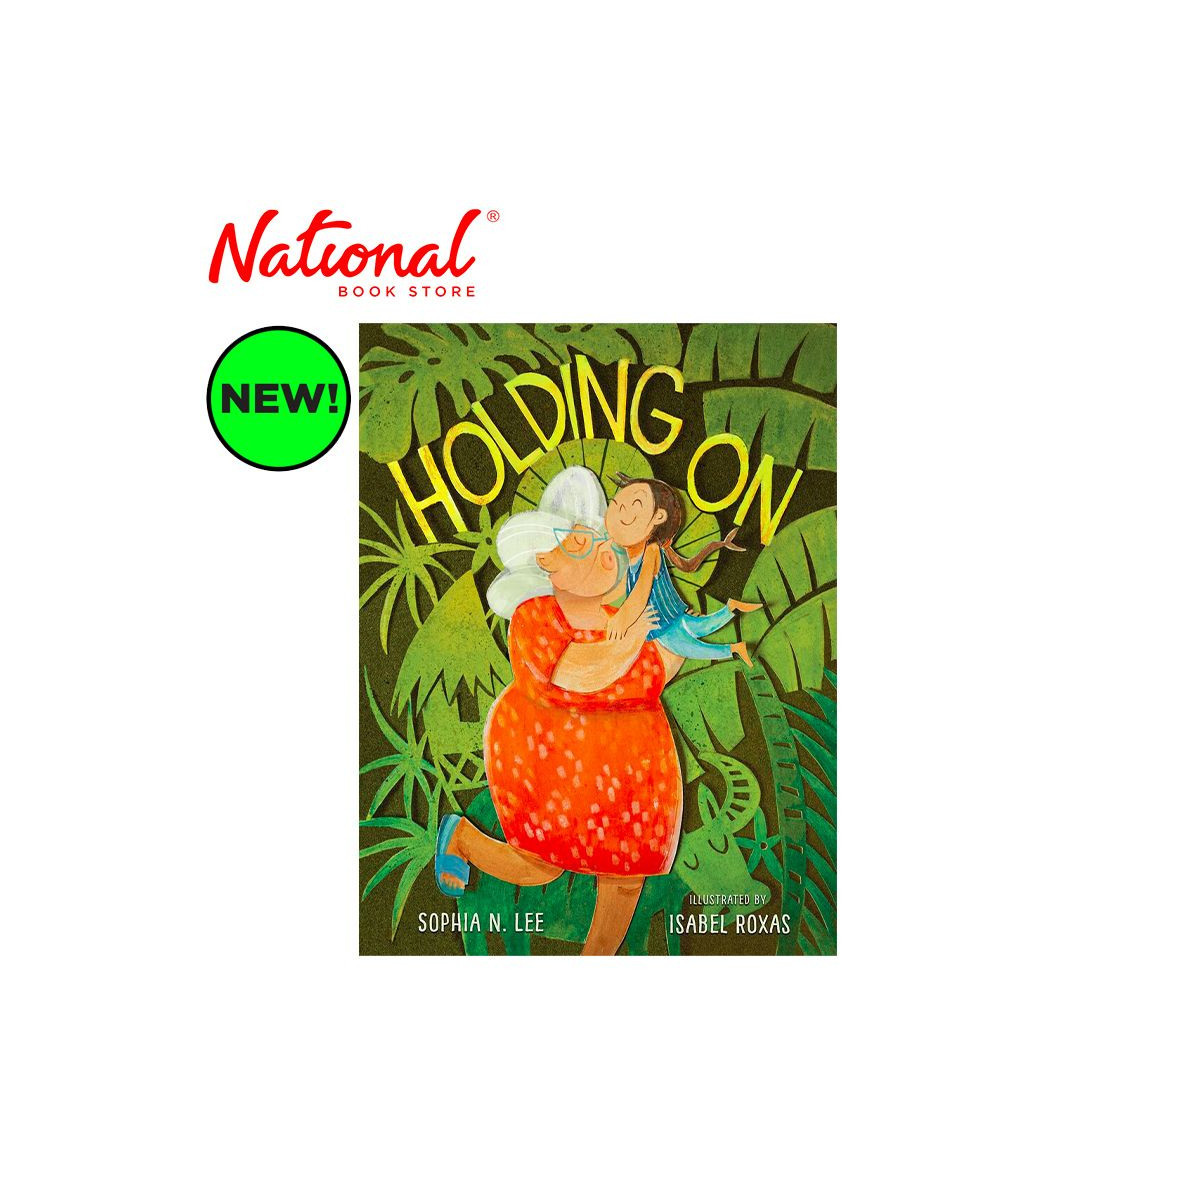 *SPECIAL ORDER* Holding On by Sophia N. Lee - Hardcover - Storybooks for Kids